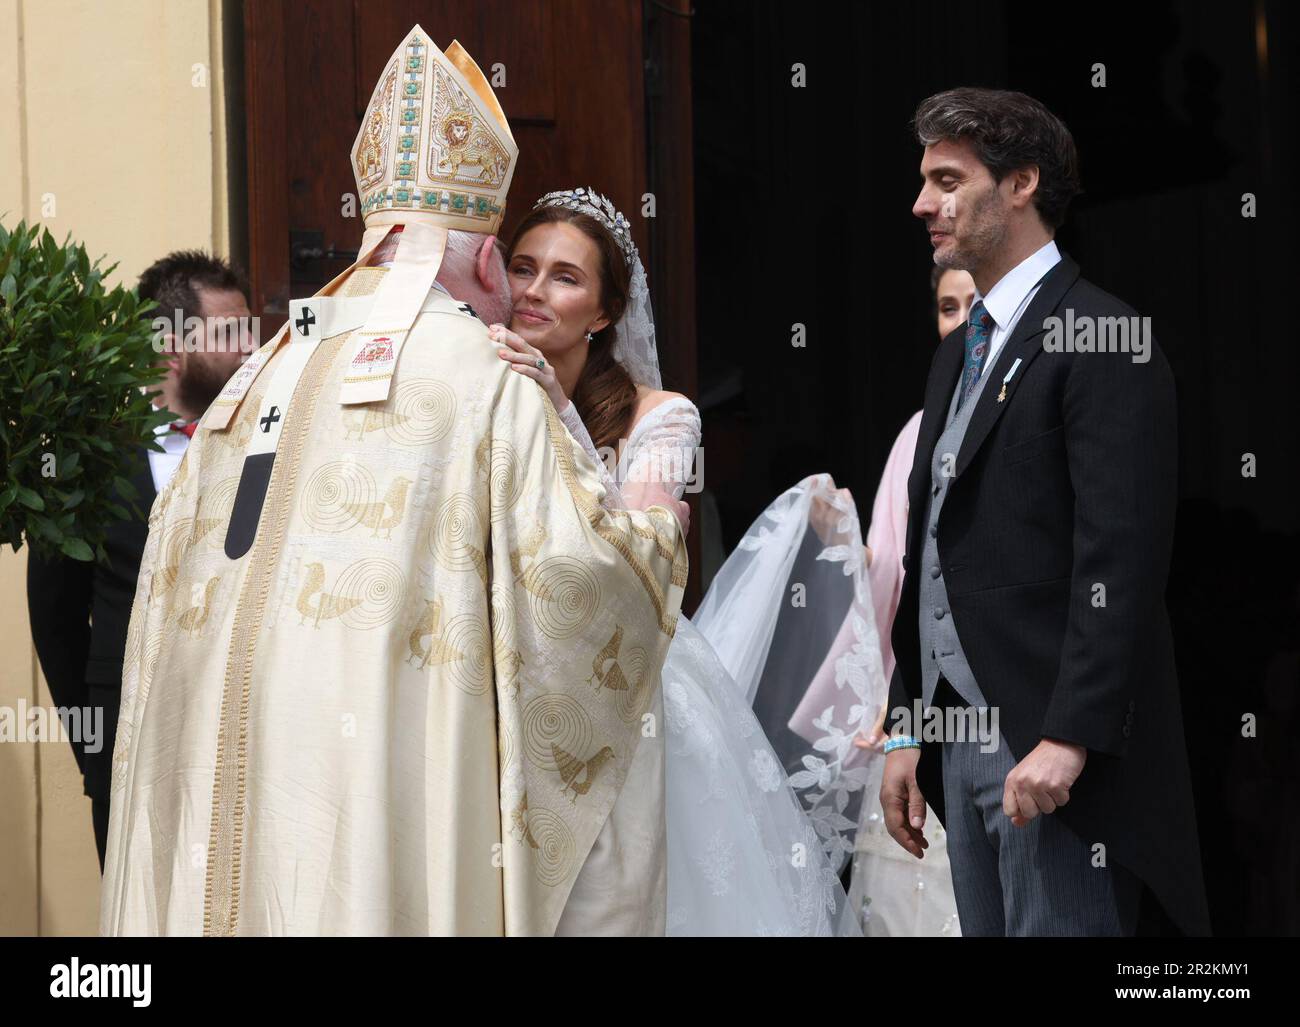 Munich, Germany. 20th May, 2023. Ludwig Prince of Bavaria (r) and his wife Sophie-Alexandra Princess of Bavaria speak with Cardinal Reinhard Marx, Archbishop of Munich and Freising, after their church wedding in front of the Theatinerkirche. Around 1,000 guests are expected to attend the festivities. Credit: Karl-Josef Hildenbrand/dpa/Alamy Live News Stock Photo